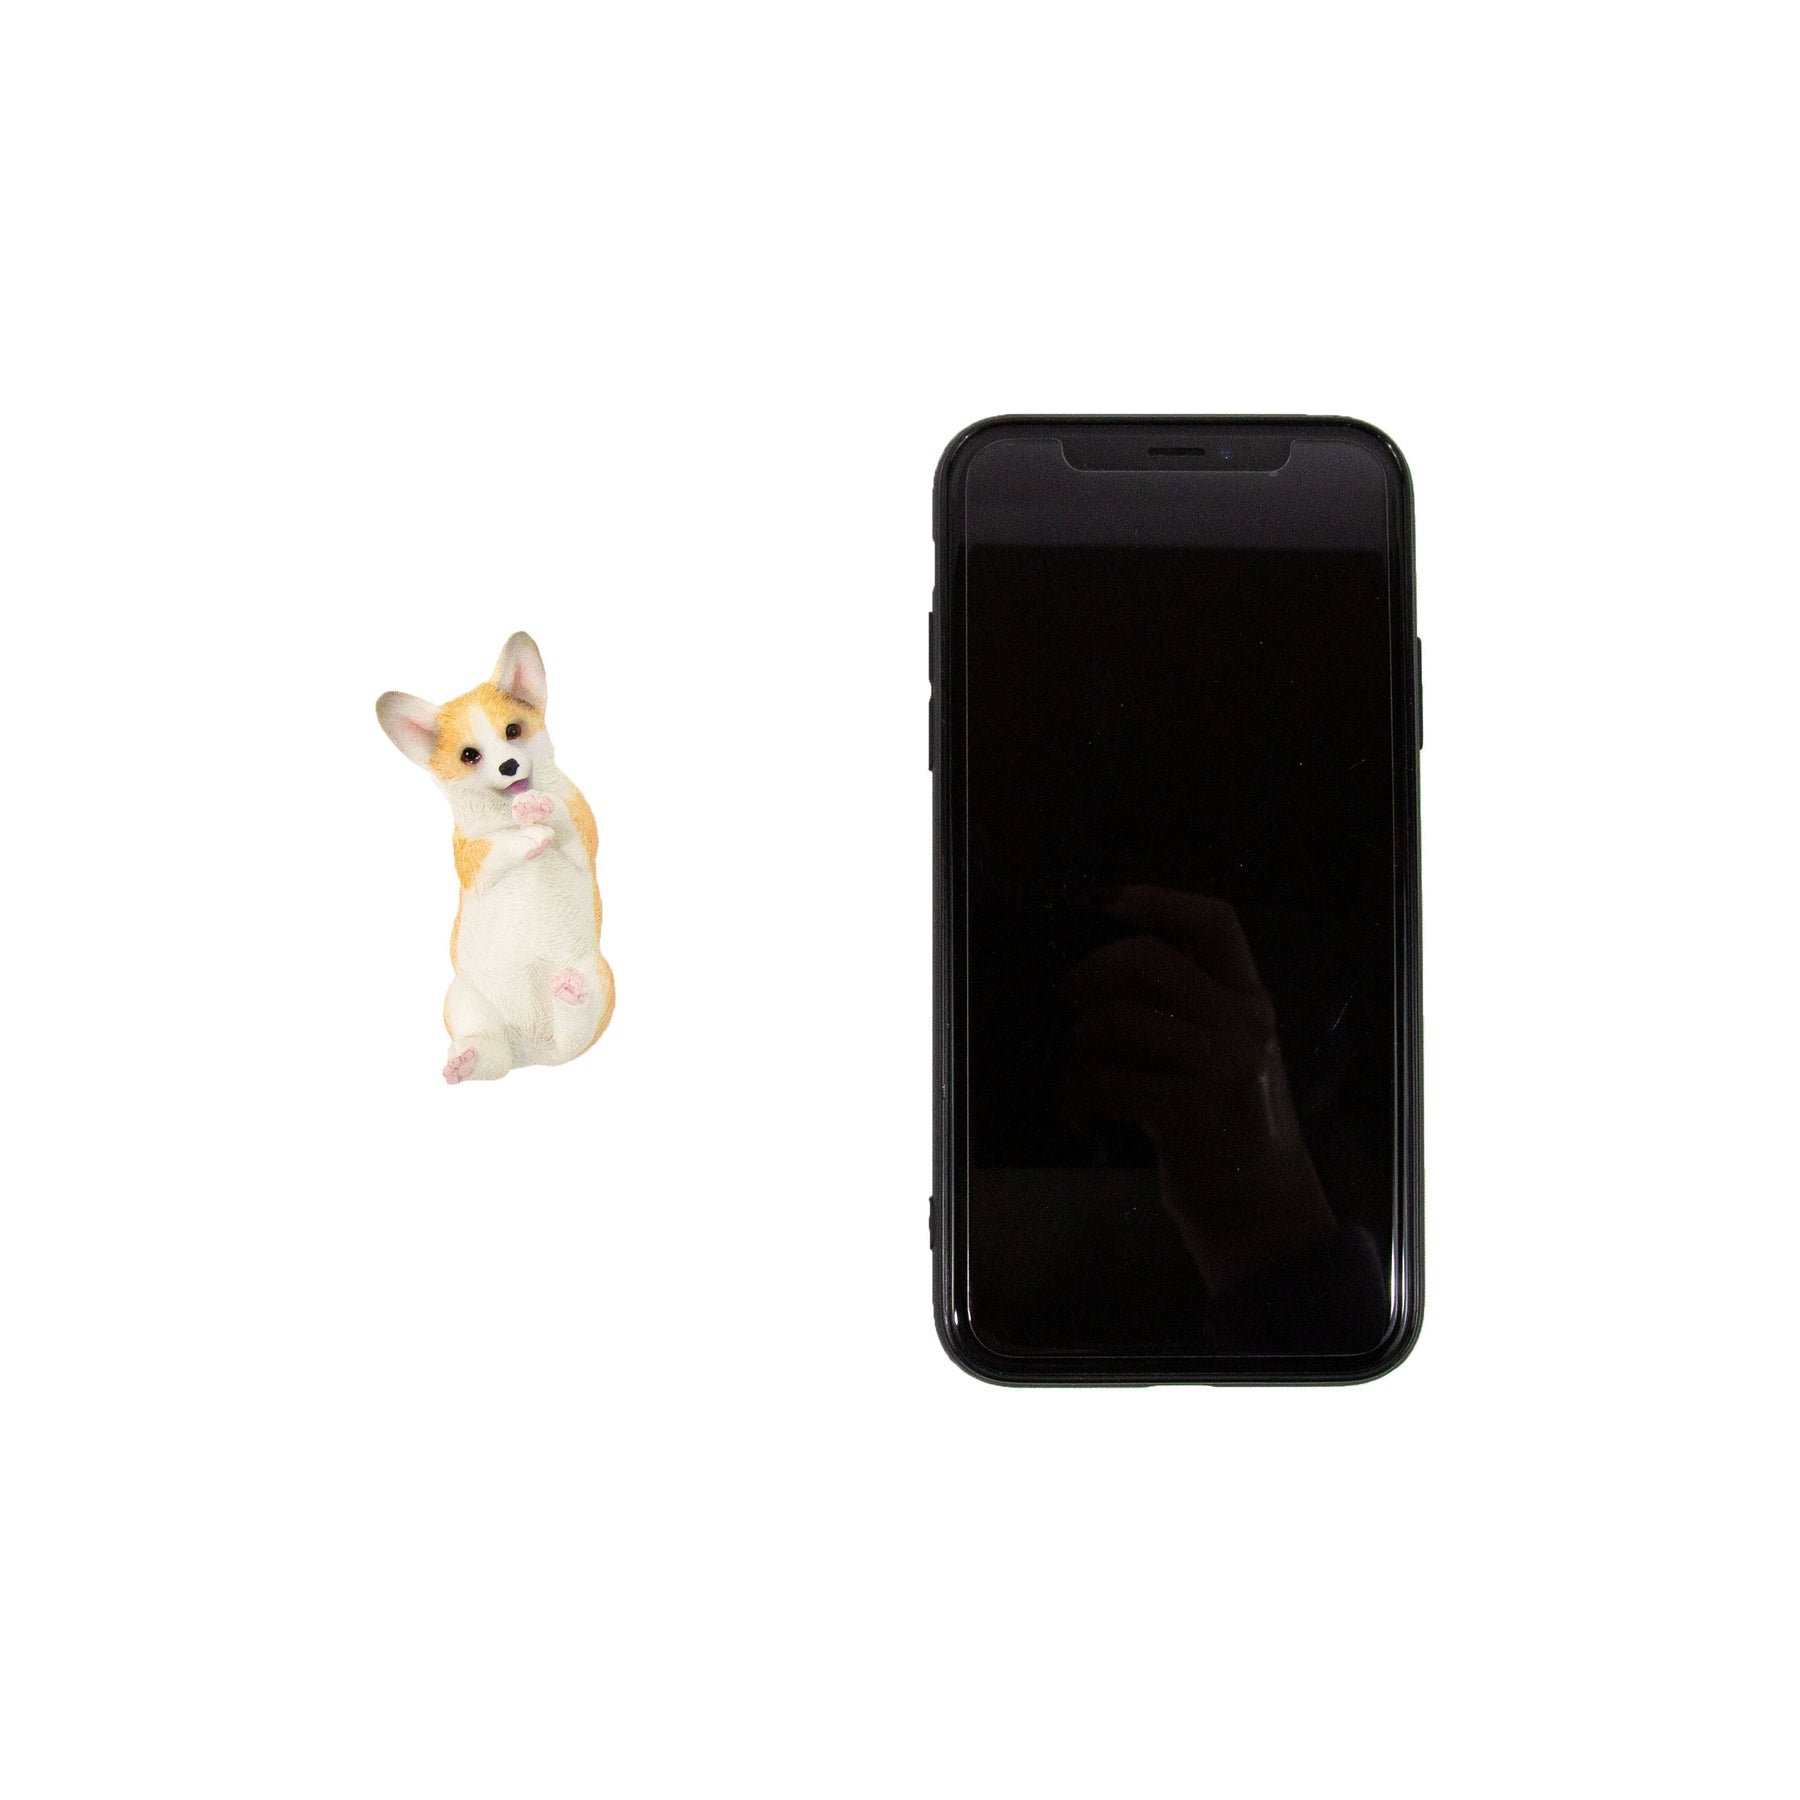 Playing Corgi Magnet (Upward Facing) - Cream and White next to phone for size comparison